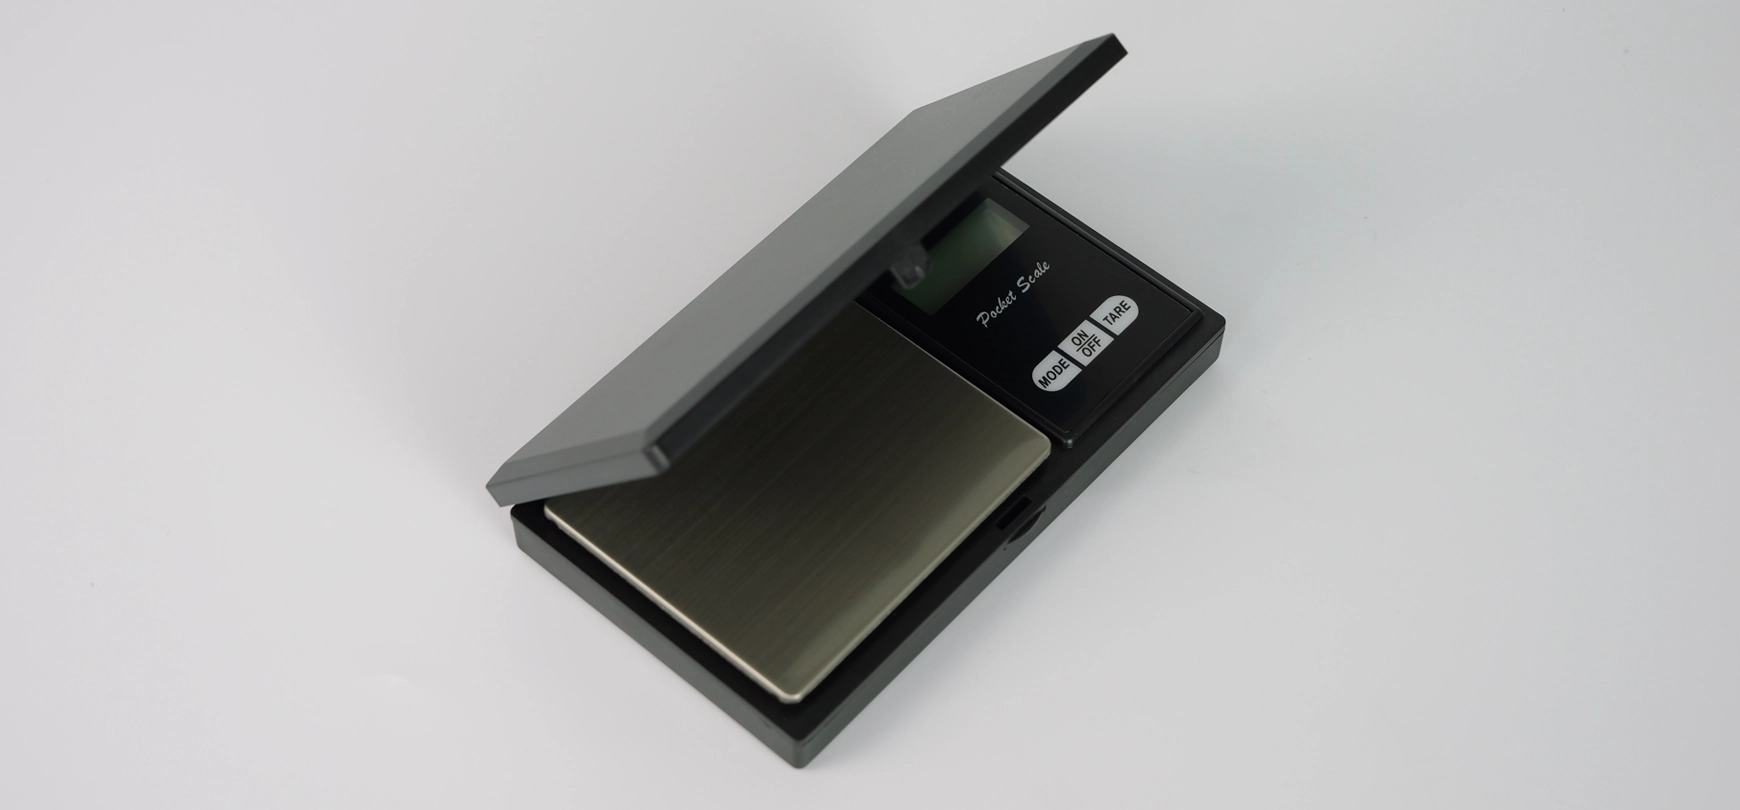 HDWR compact scale up to 500 grams